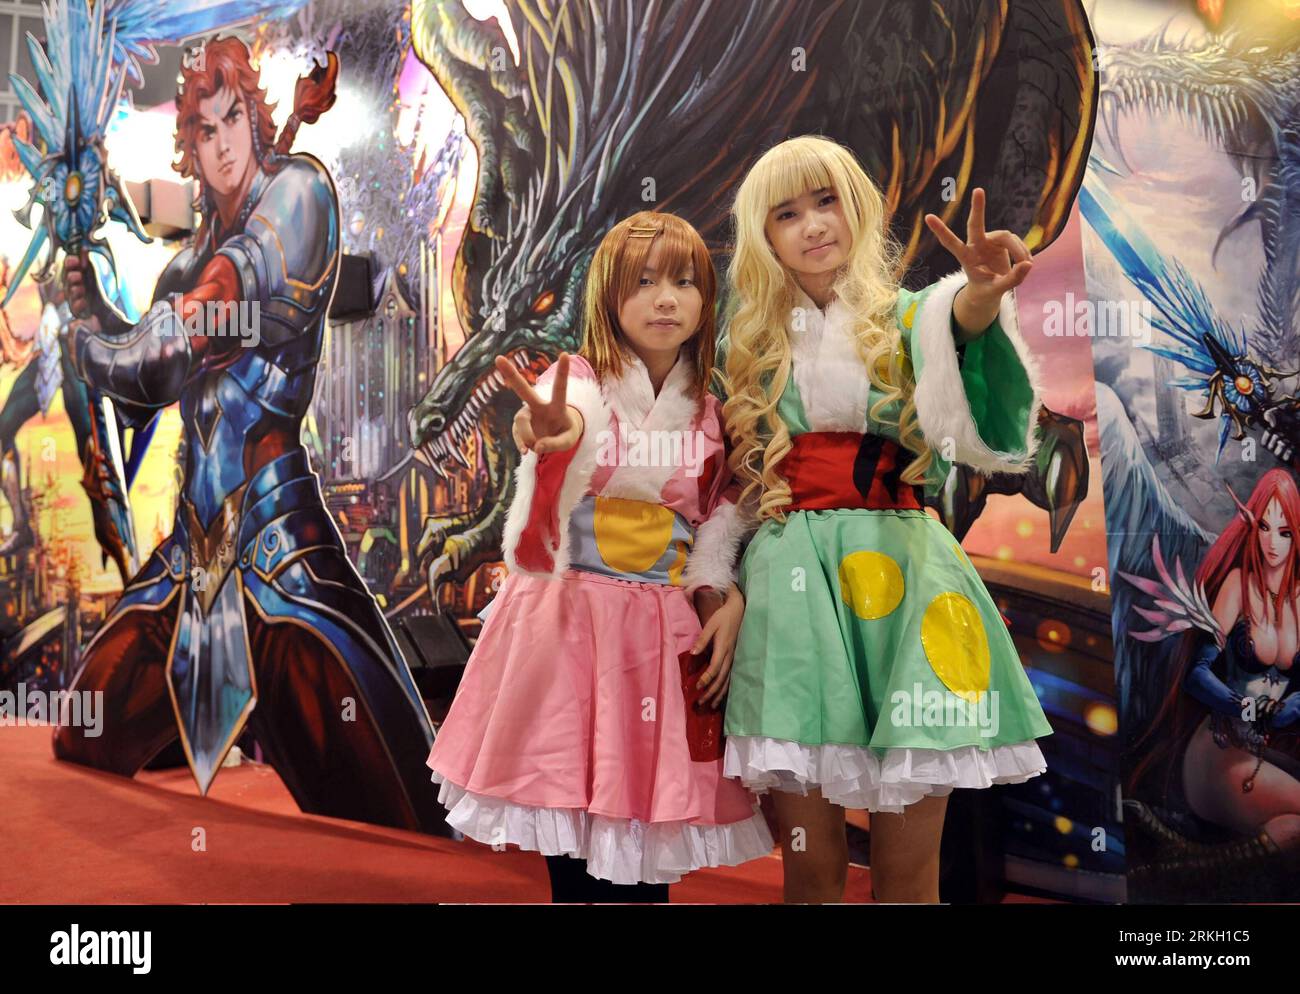 Bildnummer: 55675144  Datum: 02.08.2011  Copyright: imago/Xinhua (110802) -- HONG KONG, Aug. 2, 2011 (Xinhua) -- Anime fans dress themselves as their favourite animation characters at the Hong Kong Convention and Exhibition Centre in south China s Hong Kong, Aug. 2, 2011. The 13th Ani-Com & Games Hong Kong closed here Tuesday. Nearly 700,000 fans and industry insiders from across the globe visited the five-day animation festival. (Xinhua/Chen Xiaowei) (hy) (ljh) CHINA-HONG KONG-ANIMATION FESTIVAL (CN) PUBLICATIONxNOTxINxCHN Gesellschaft Messe Spielemesse Cartoonmesse Computerspiel Hongkong xtm Stock Photo